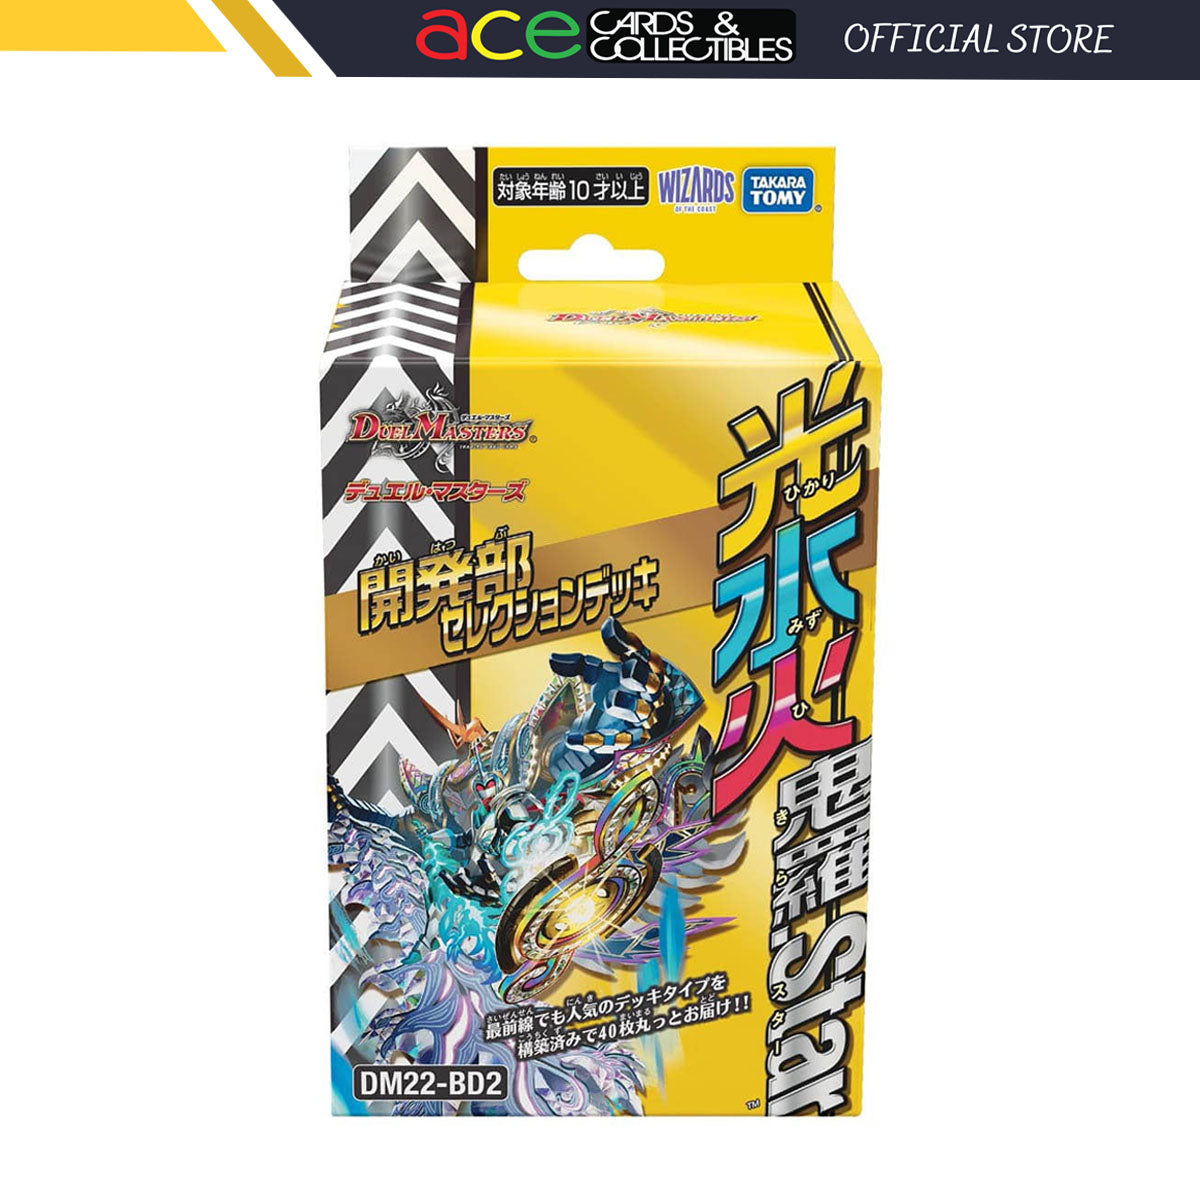 Duel Masters TCG Development Department Selection Deck Vol.1 [DM22-BD2] (Japanese)-Takara Tomy-Ace Cards &amp; Collectibles